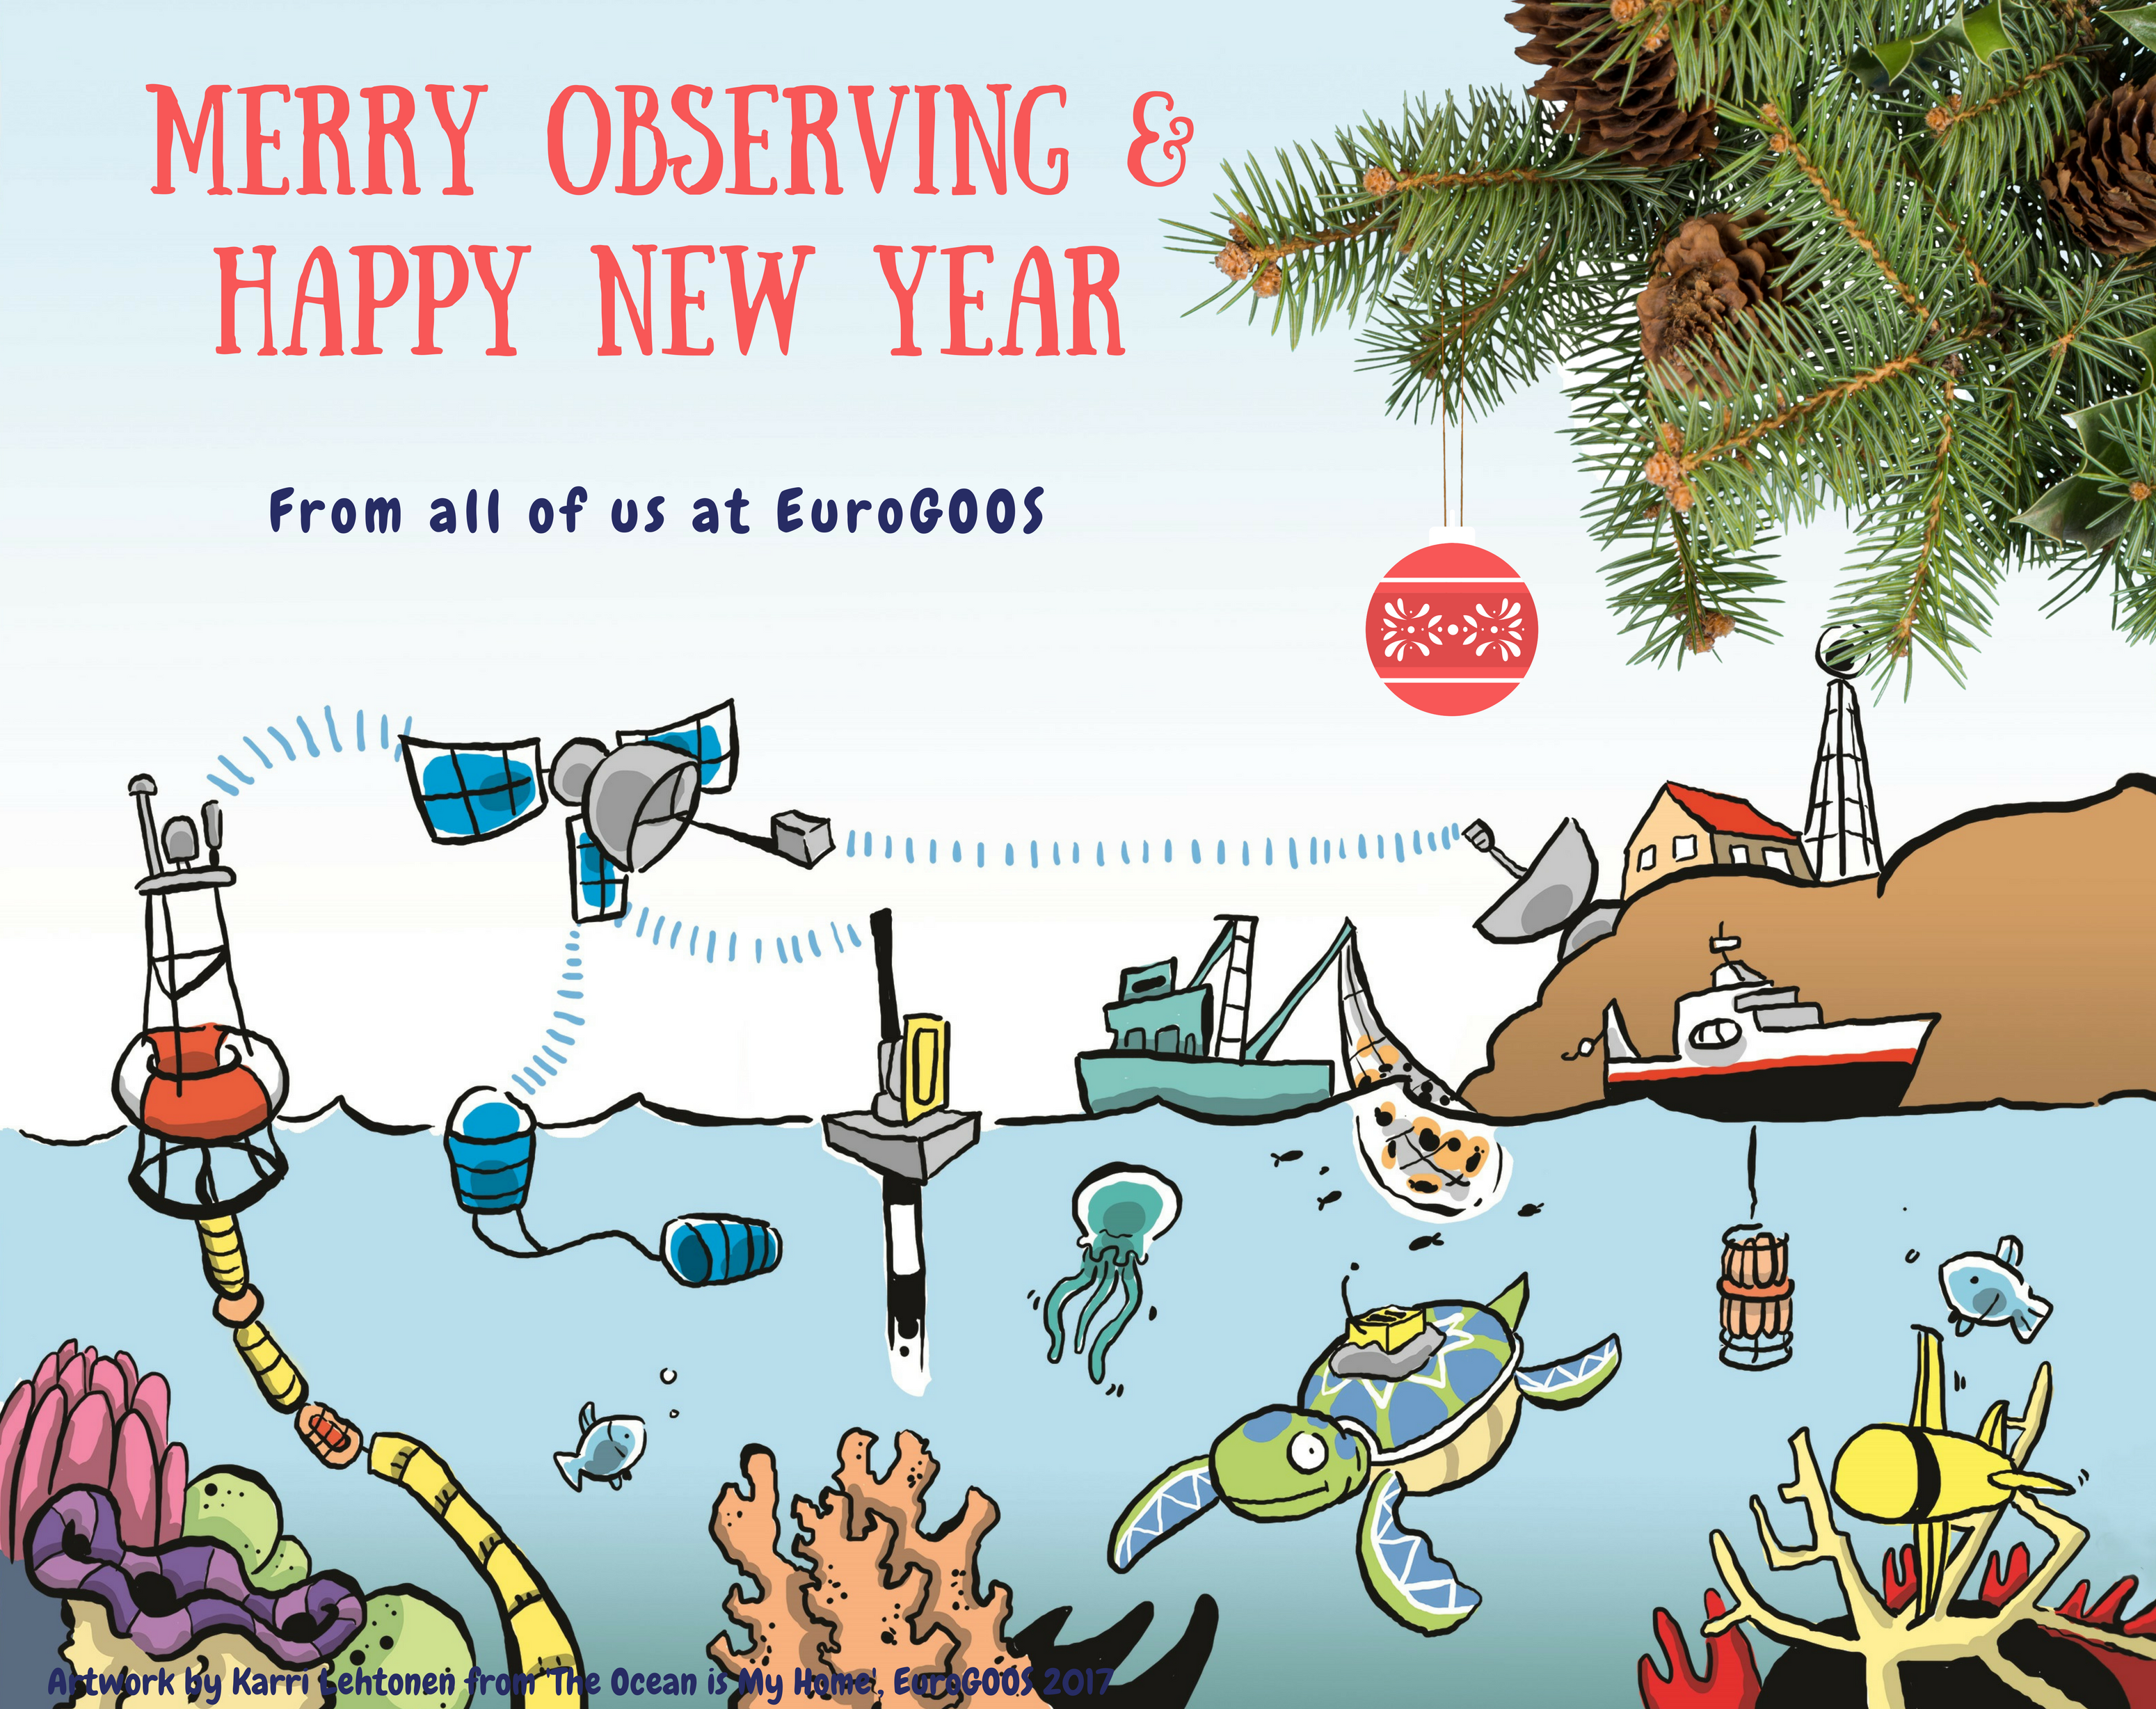 Merry Observing & Happy New Year from EuroGOOS